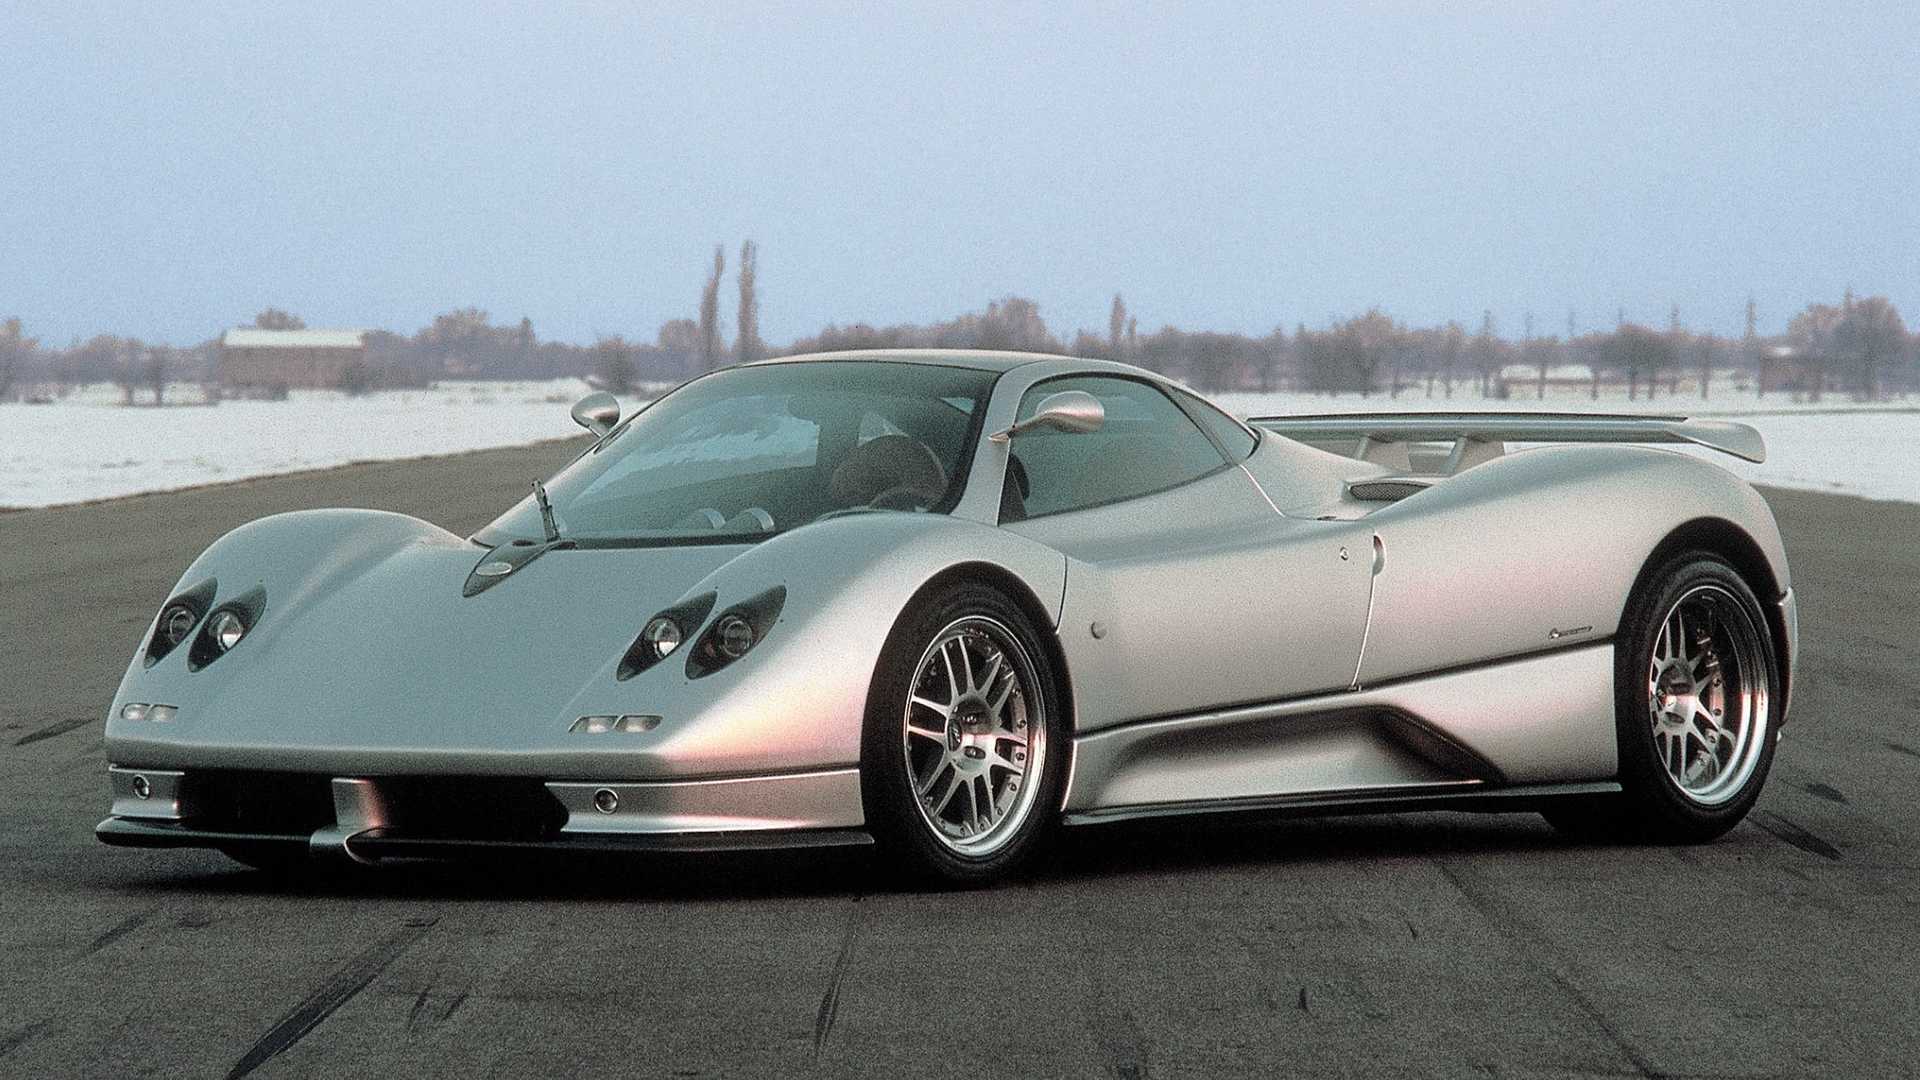 Silver Pagani Zonda parked on country road in winter